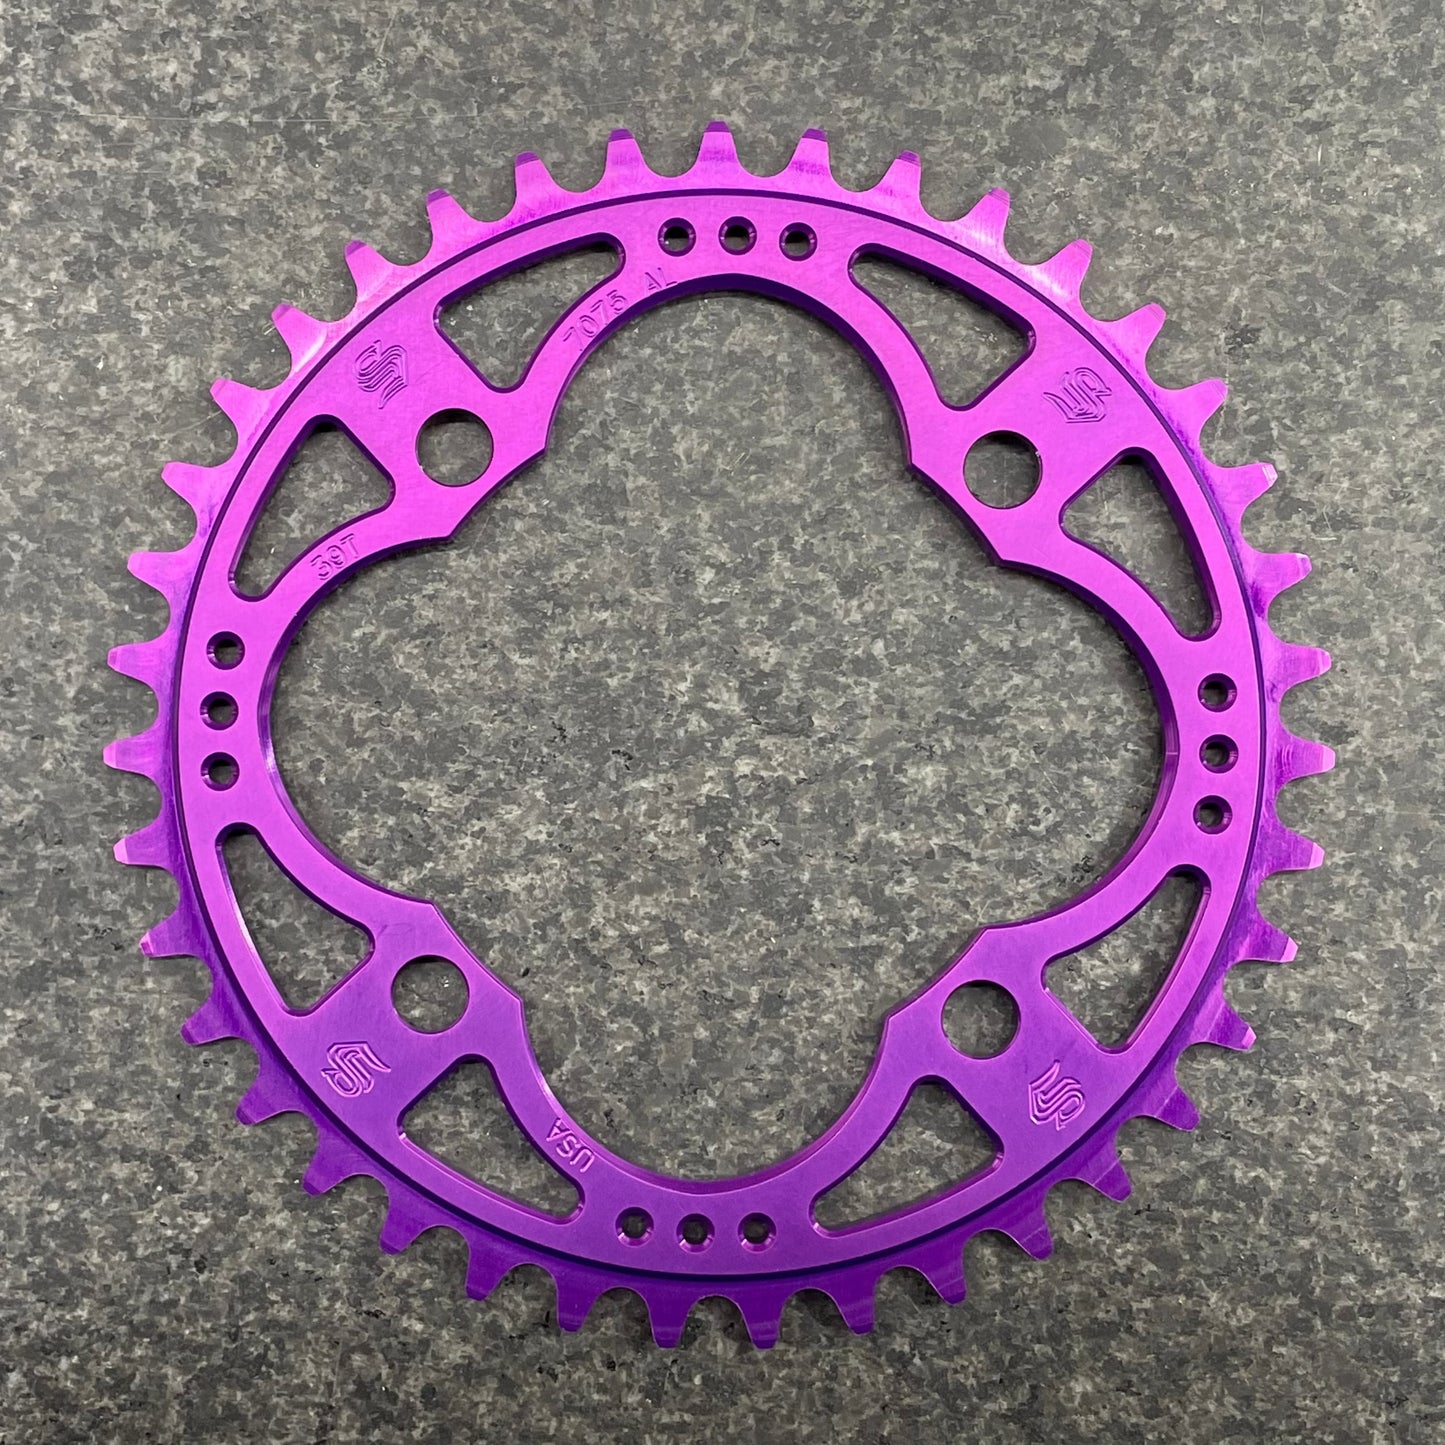 S75 4 bolt Chainrings